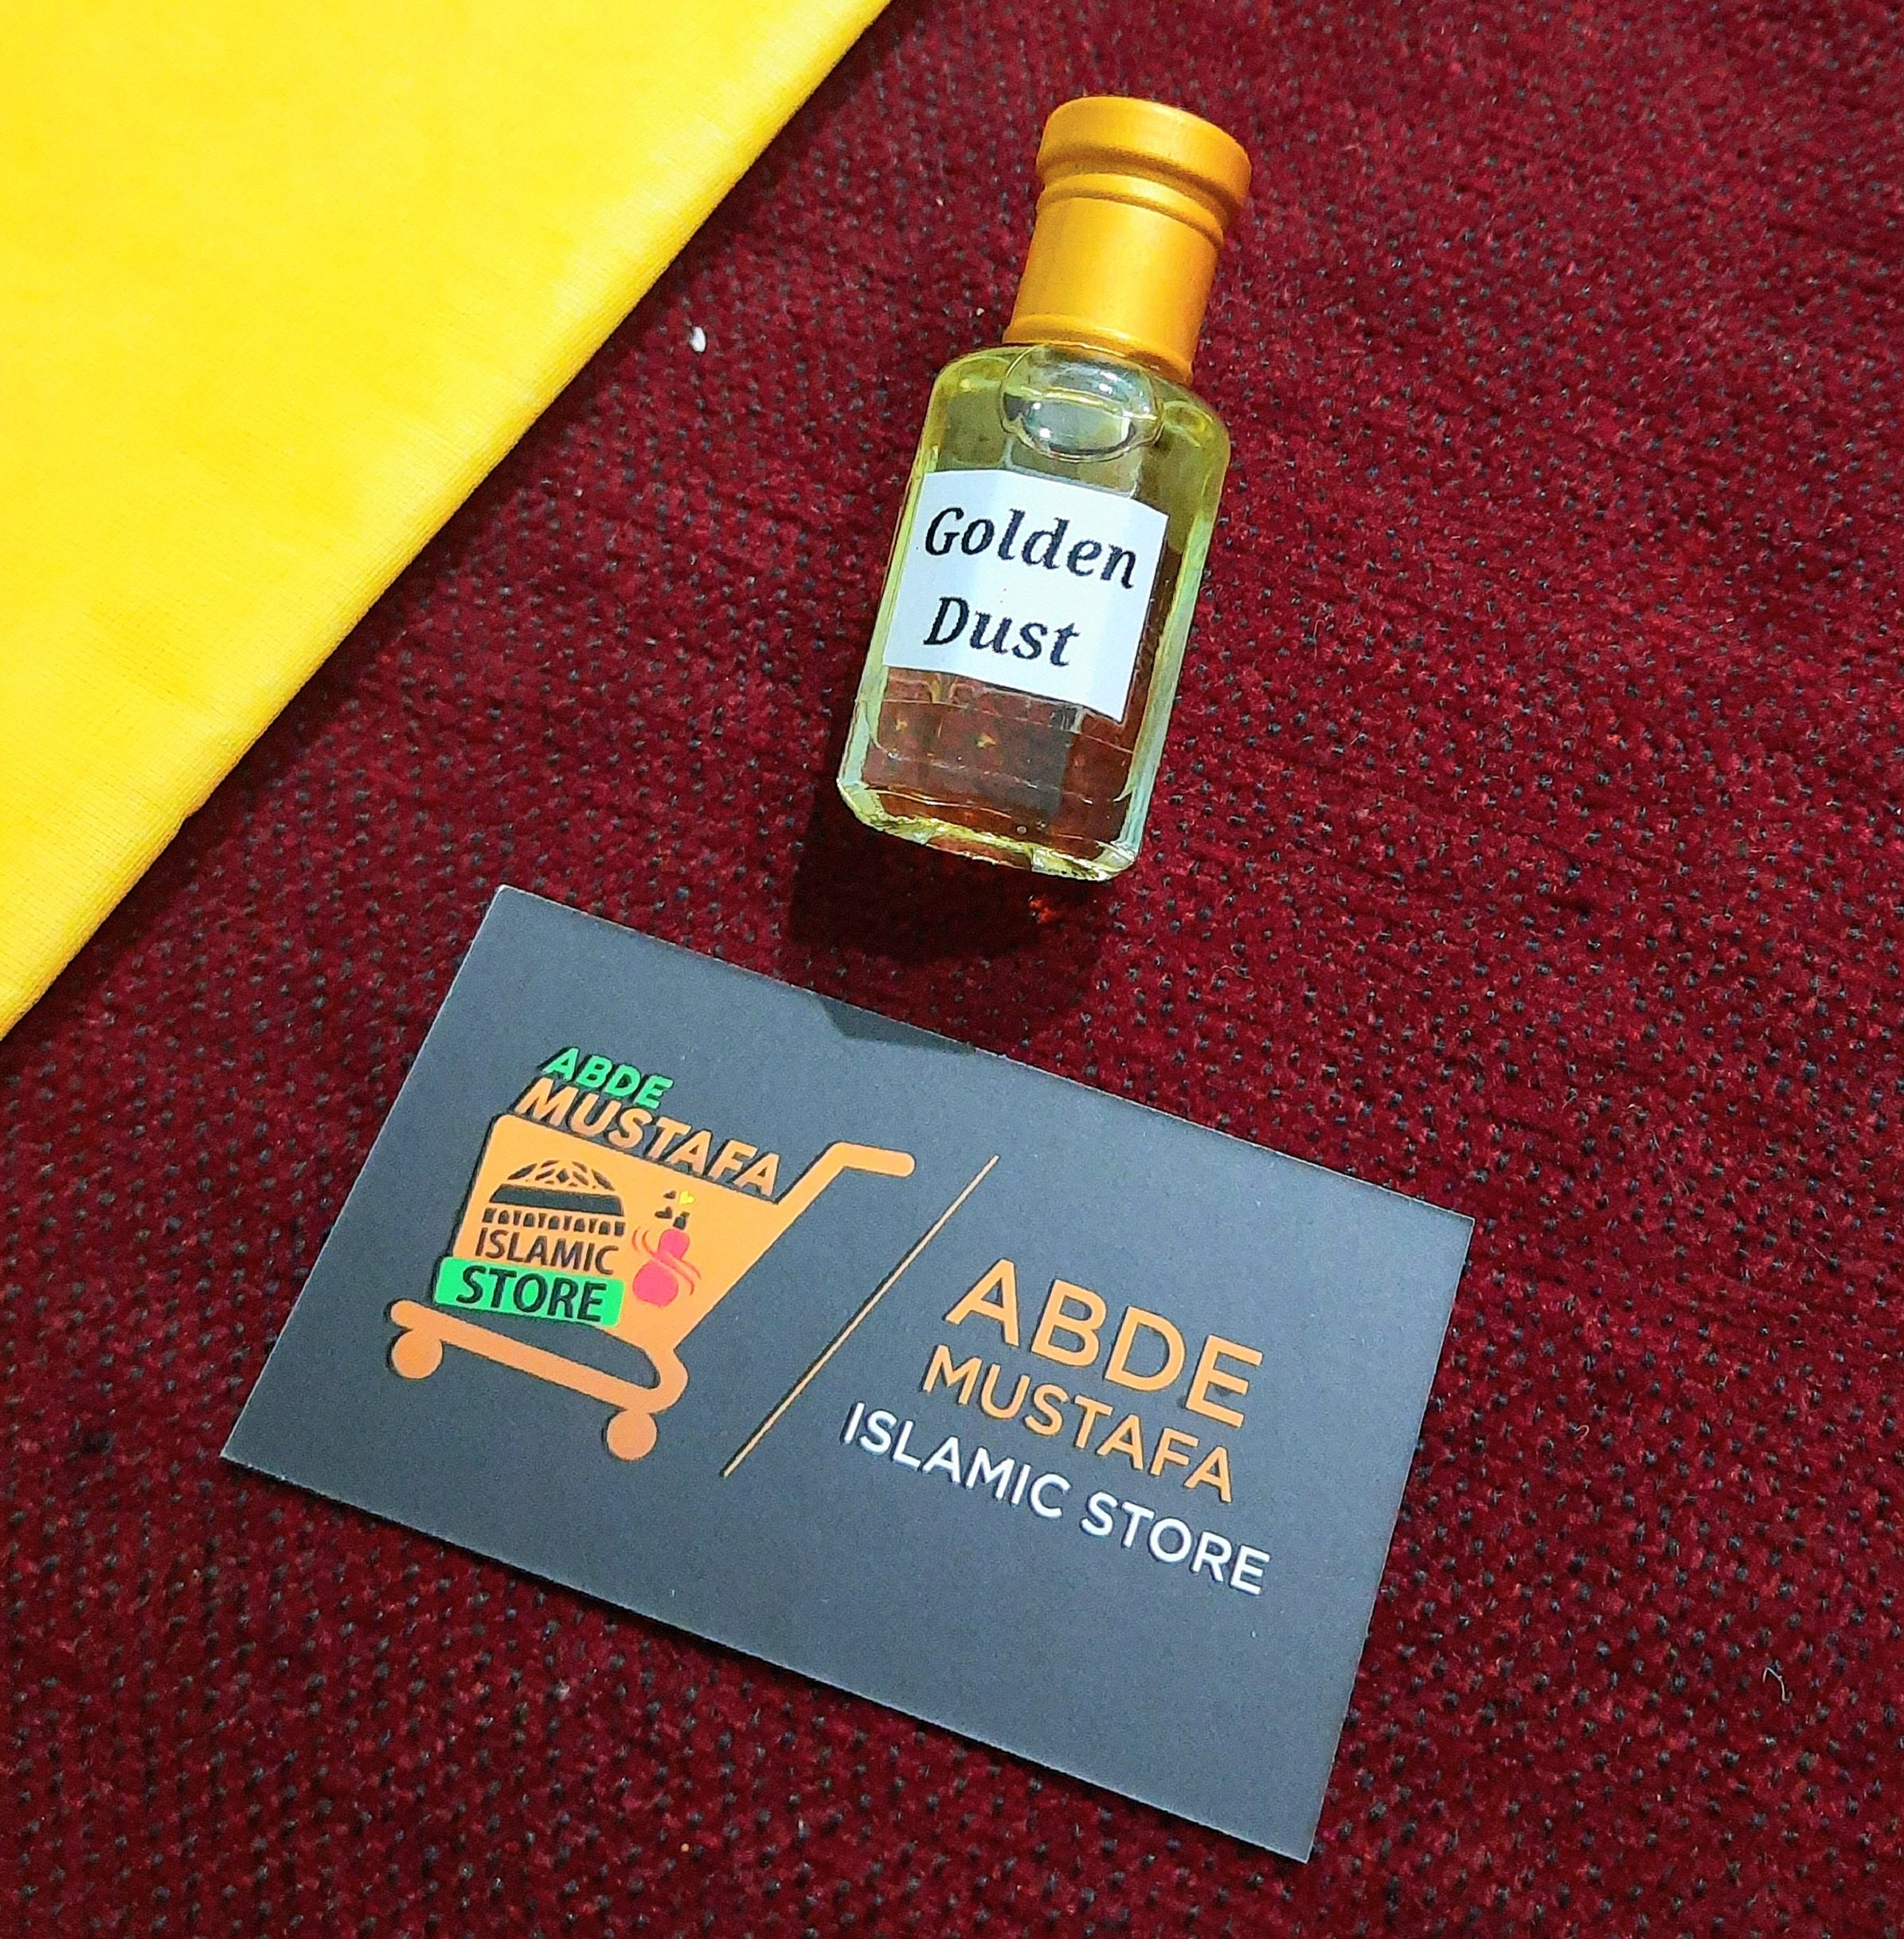 Golden Dust Premium Quality Attar Perfume (French Perfume) And 3 Sample Free By Abde Mustafa Store